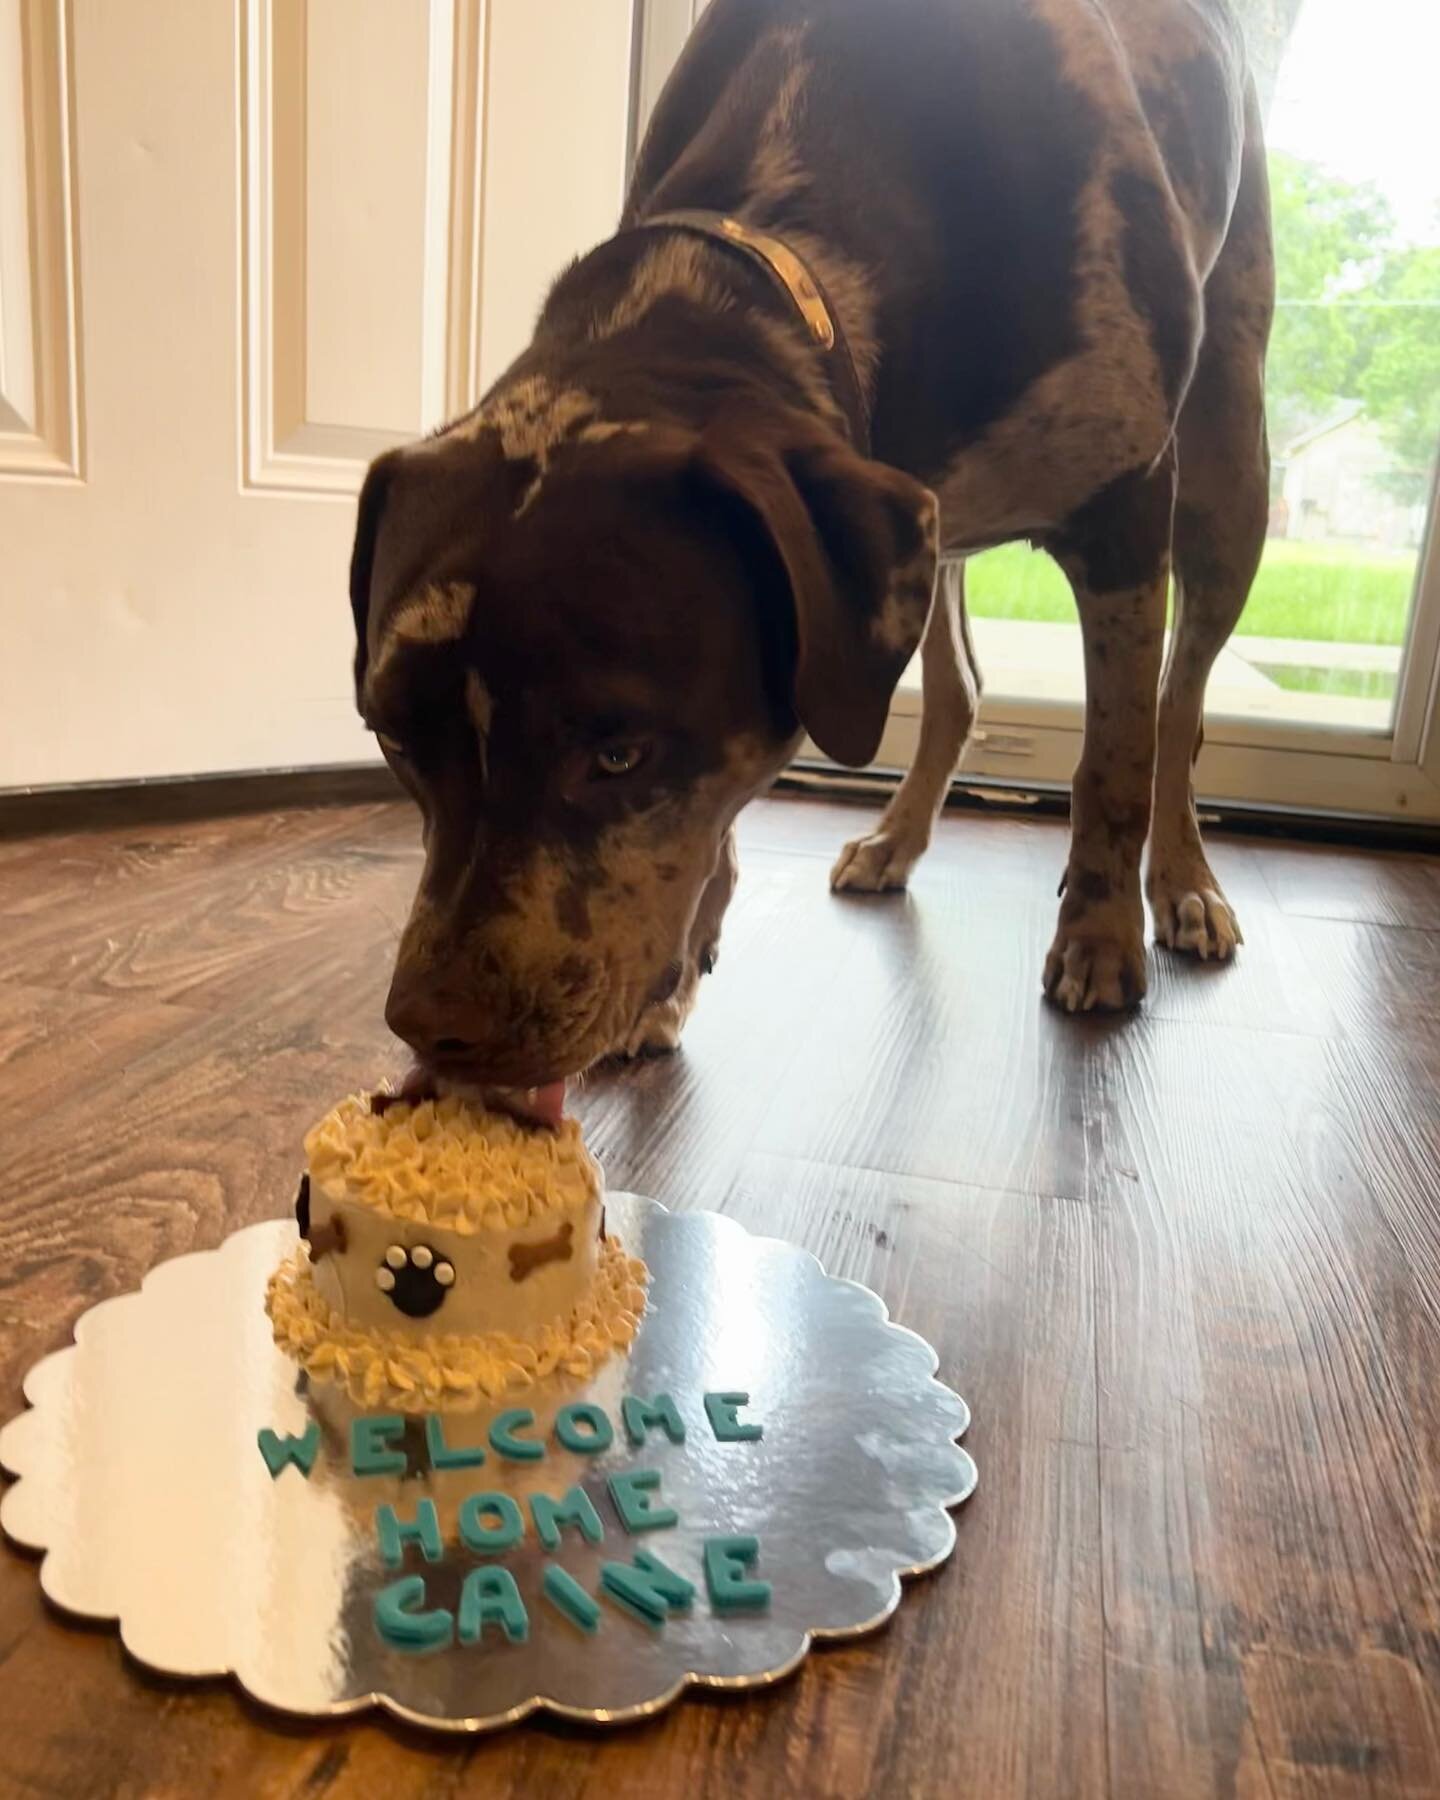 Welcome home to our friend Caine. Your mom is happy to have you back and we are happy to have baked for you 🏡 🐾💖 #atx #atxdogs #atxdog #atxdogstagram #dogsofinstagram #dogsofzilkerpark #dogtreats #dogcakes #dogbirthday #birthdaydog #specialdog #pe